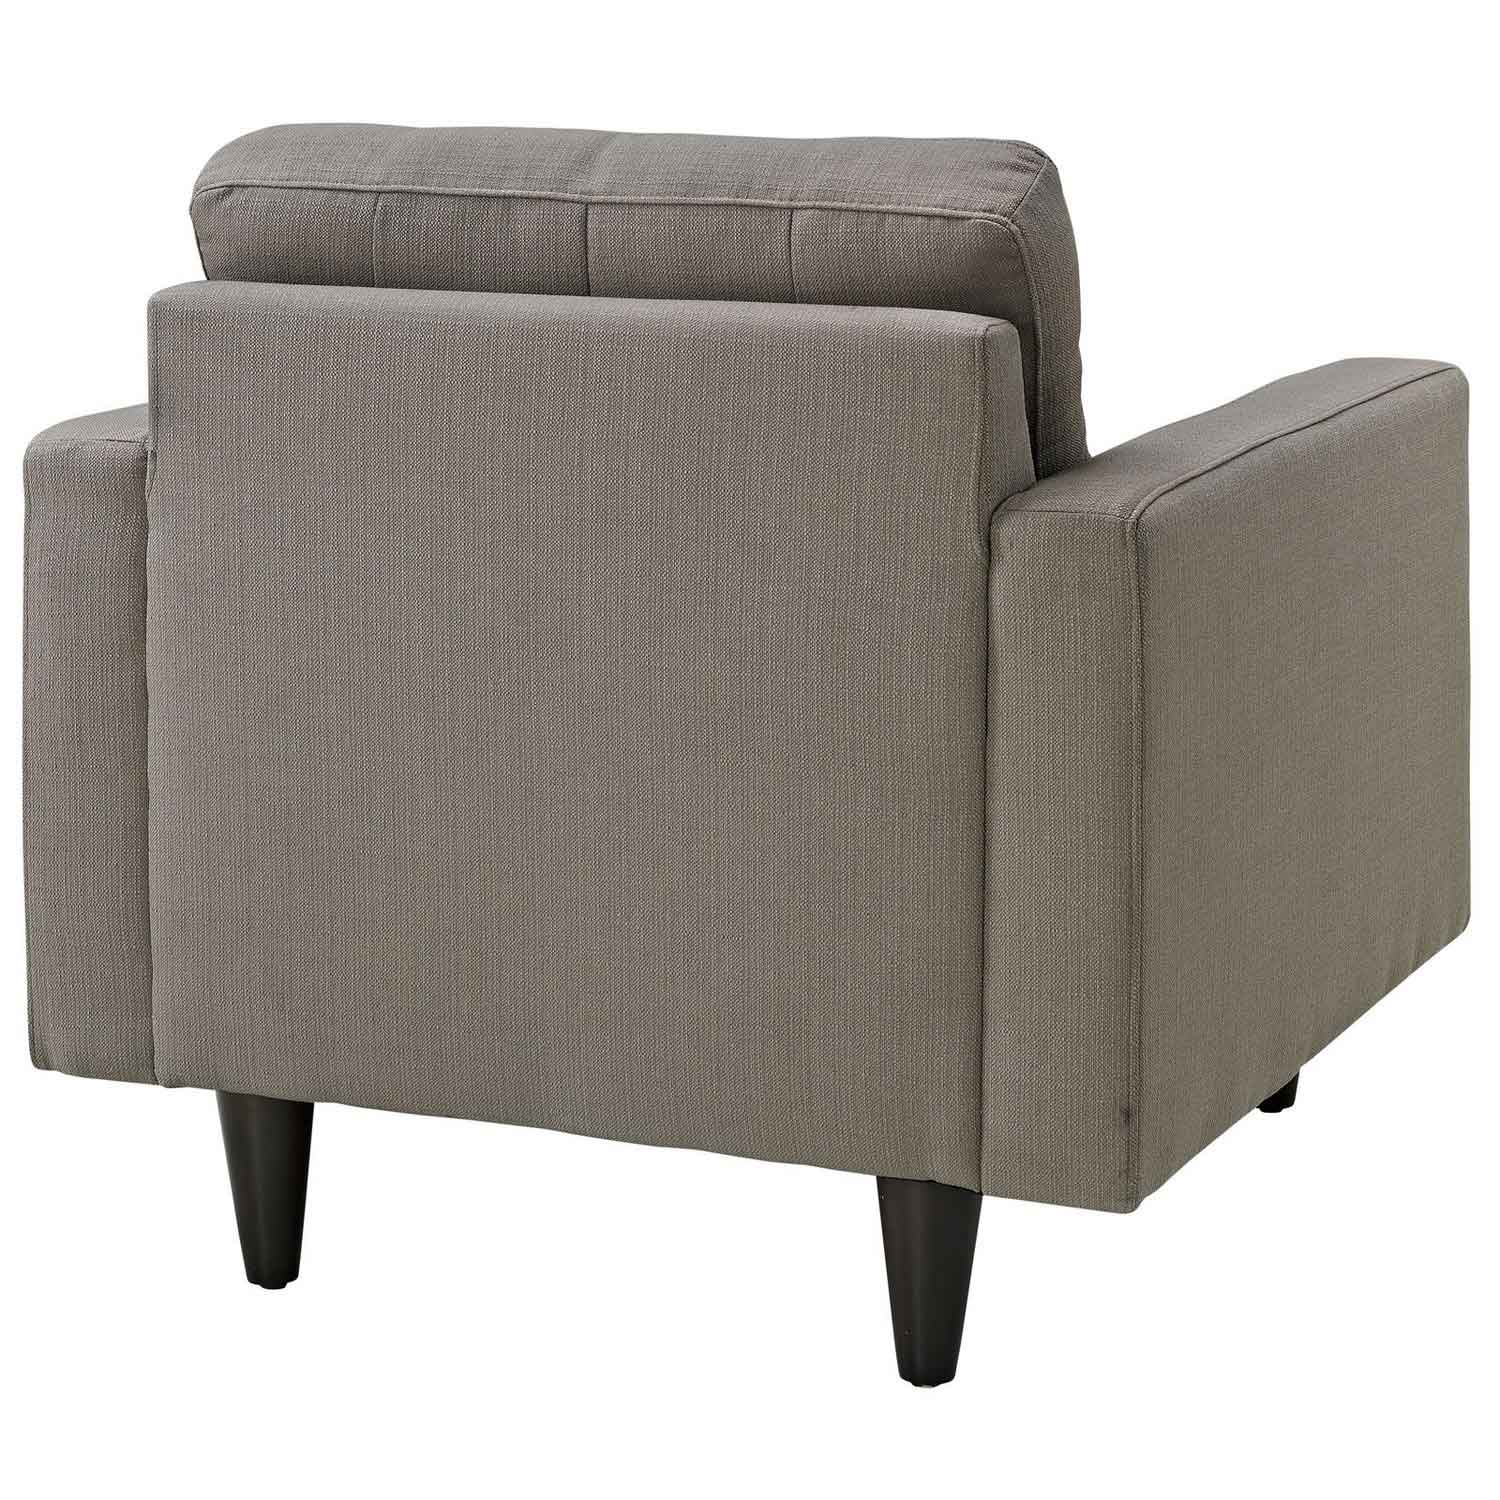 Modway Empress Upholstered Armchair - Granite